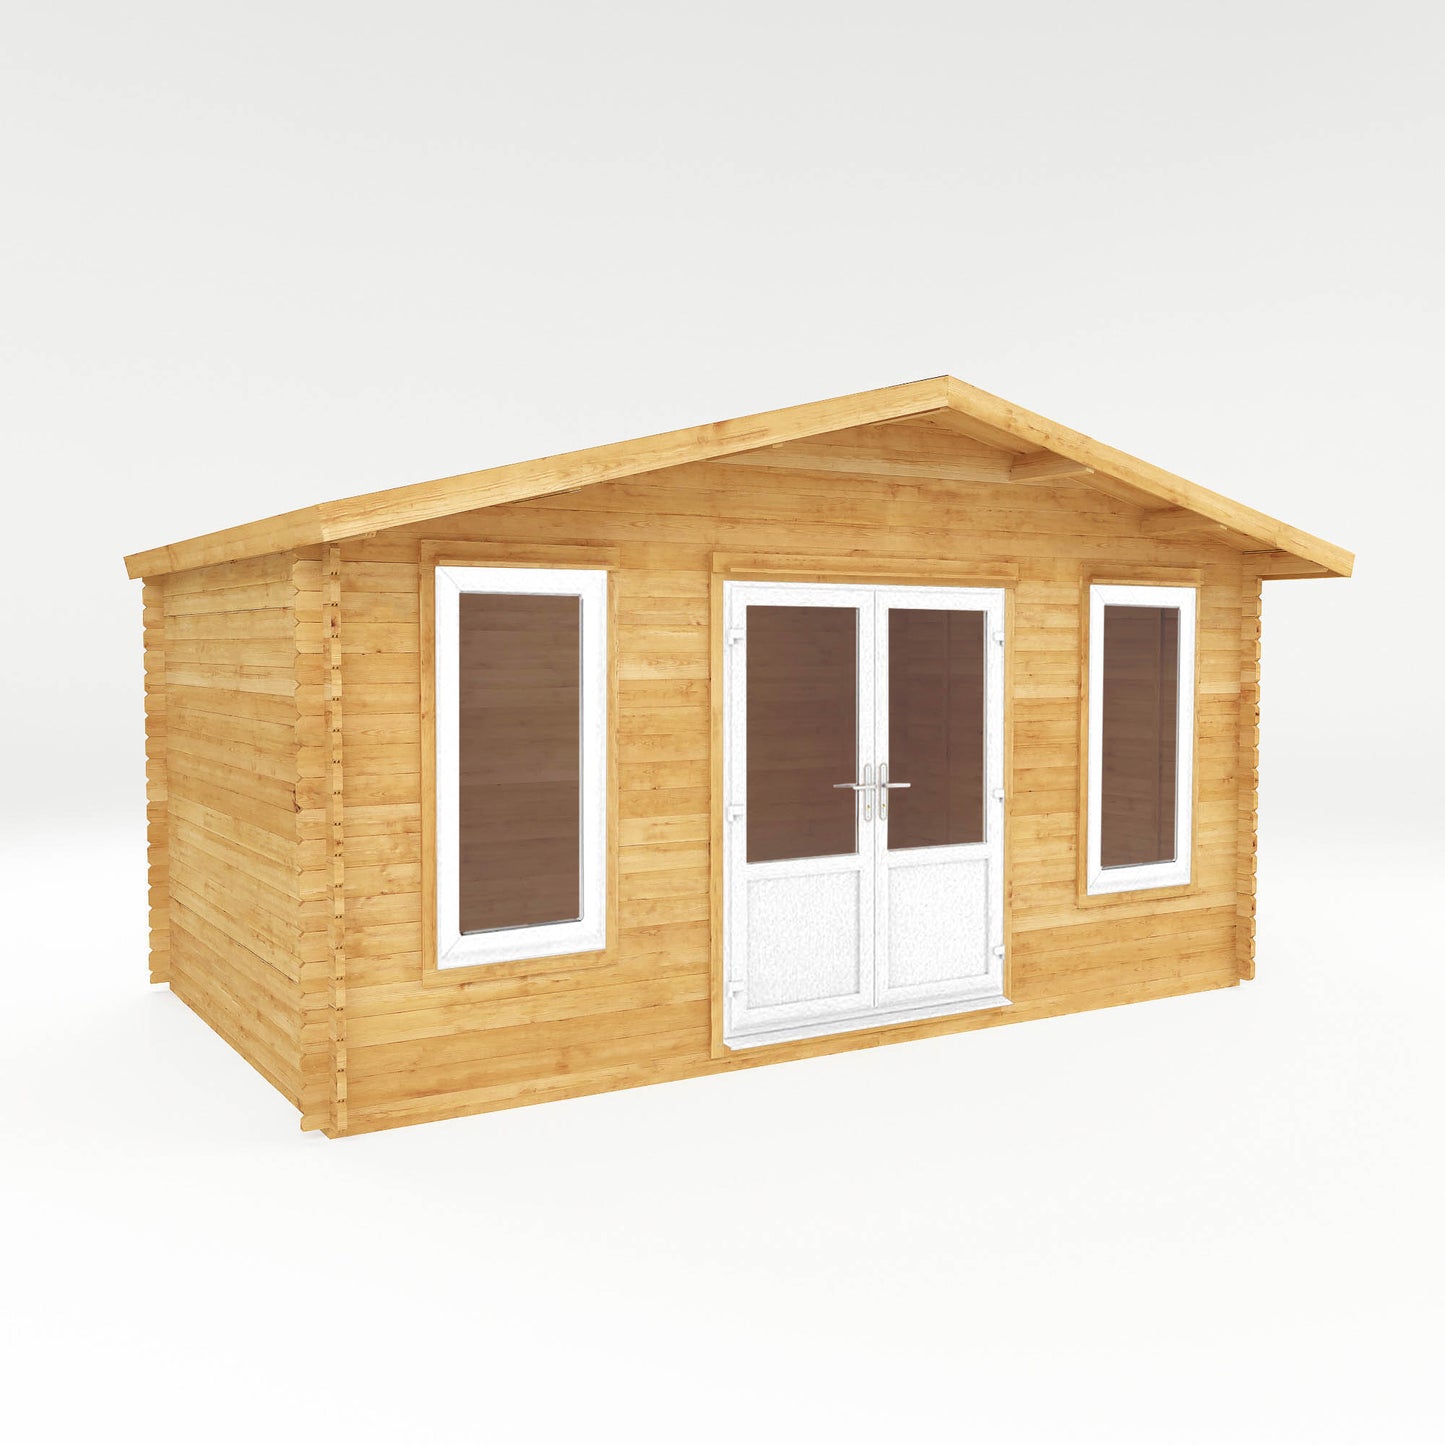 The 5m x 3m Sparrow Log Cabin with White UPVC